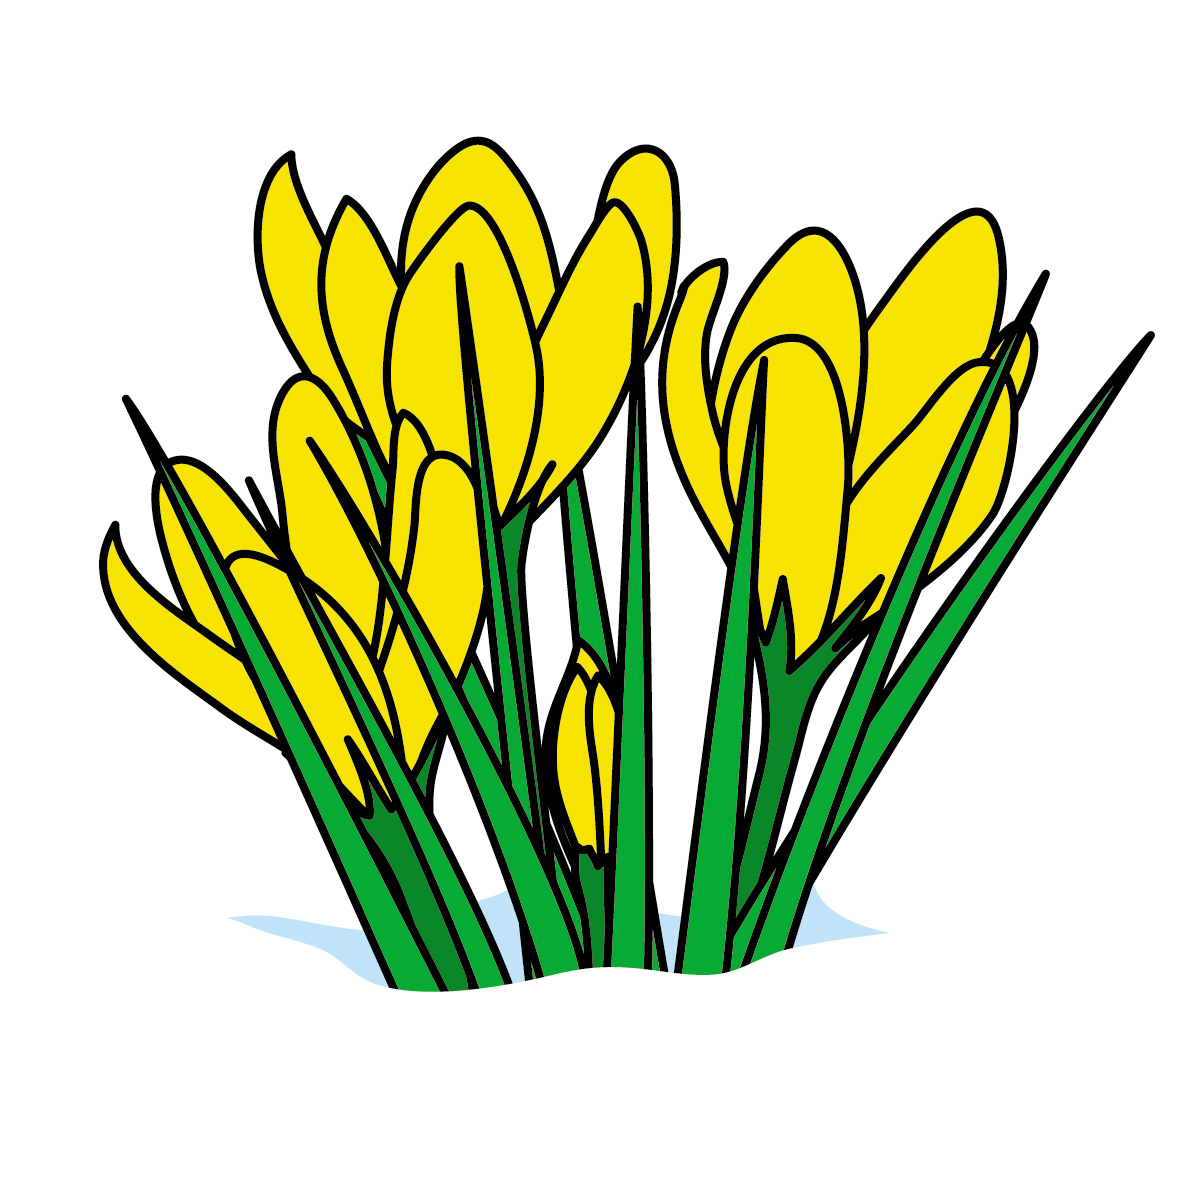 There Is 52 First Day Of Spring   Free Cliparts All Used For Free